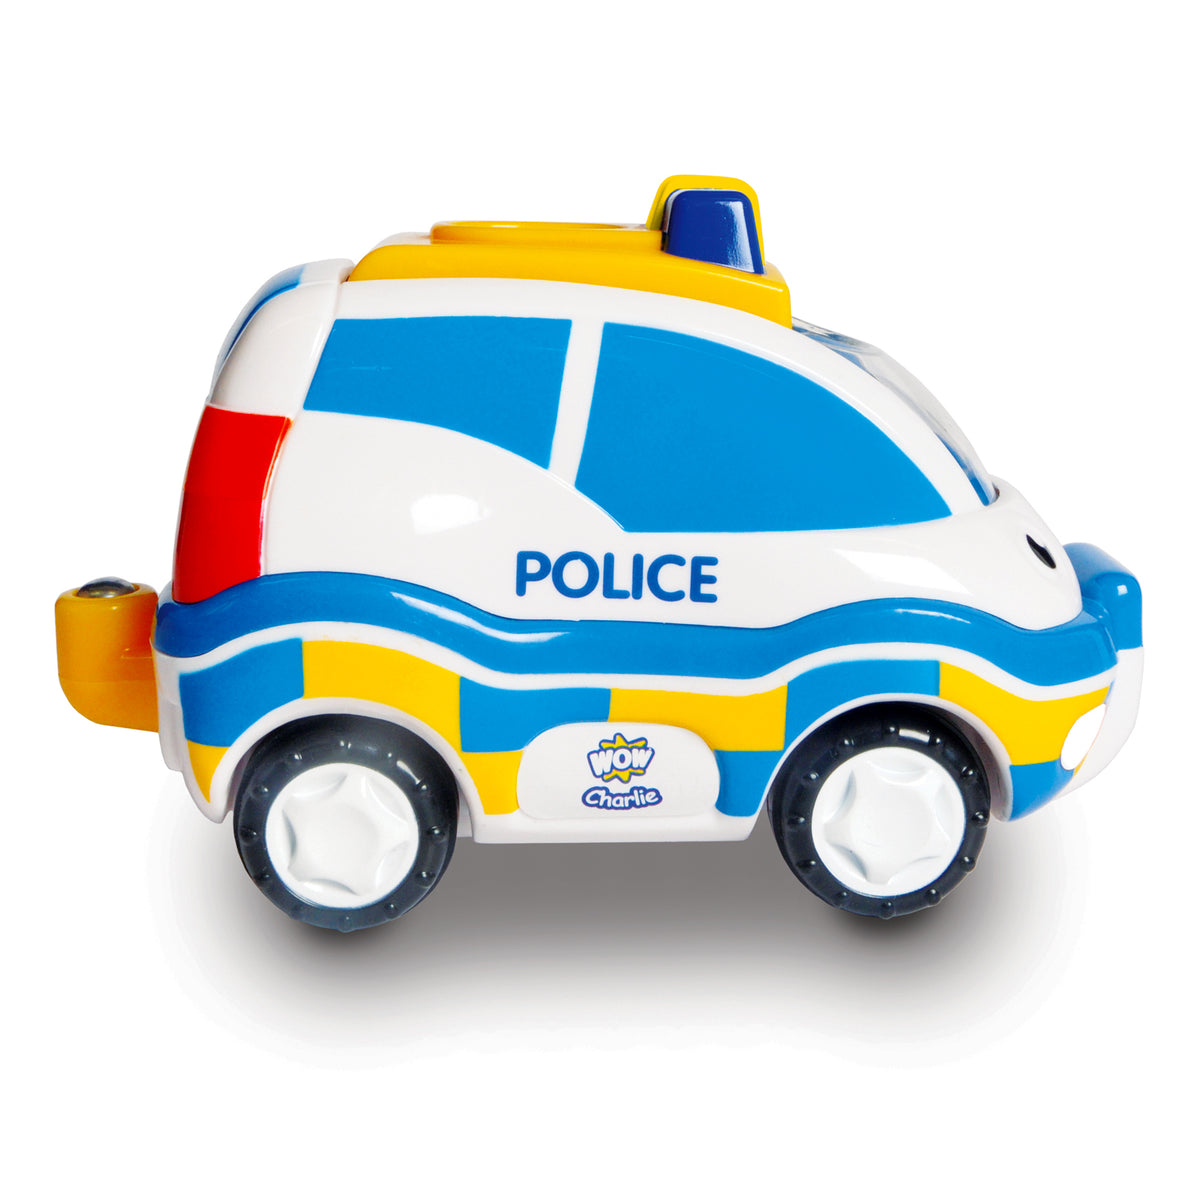 WOW Toys Police Chase Charlie